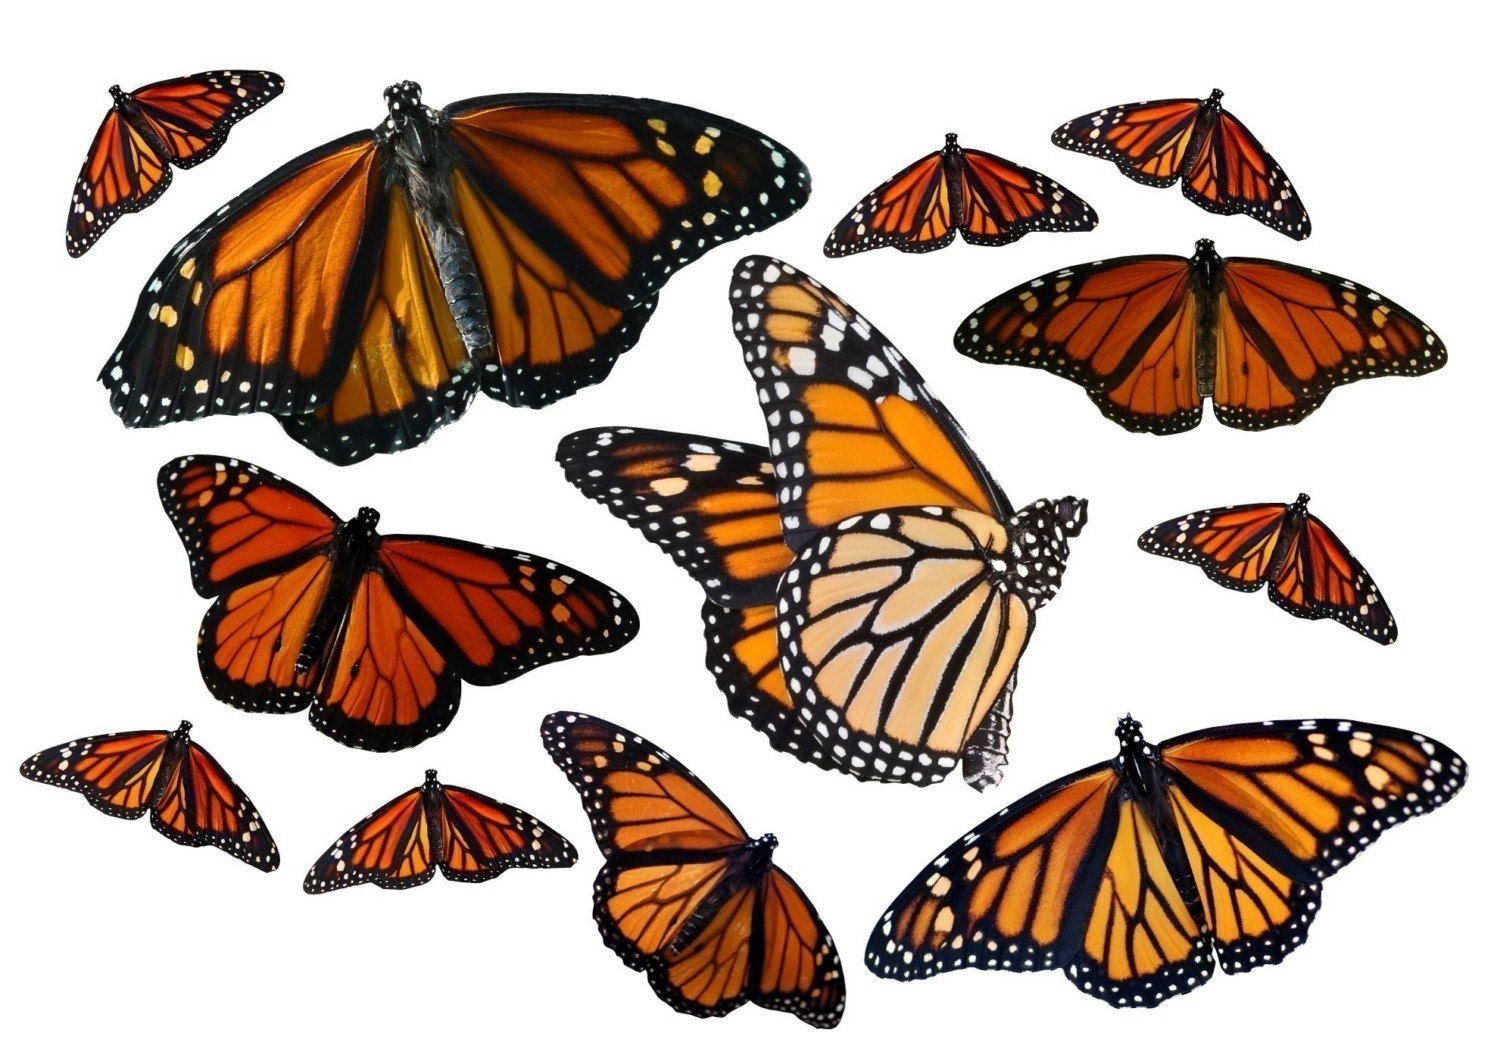 Large Monarch Butterfly Vinyl Decal Set By Wilsongraphics On Etsy 